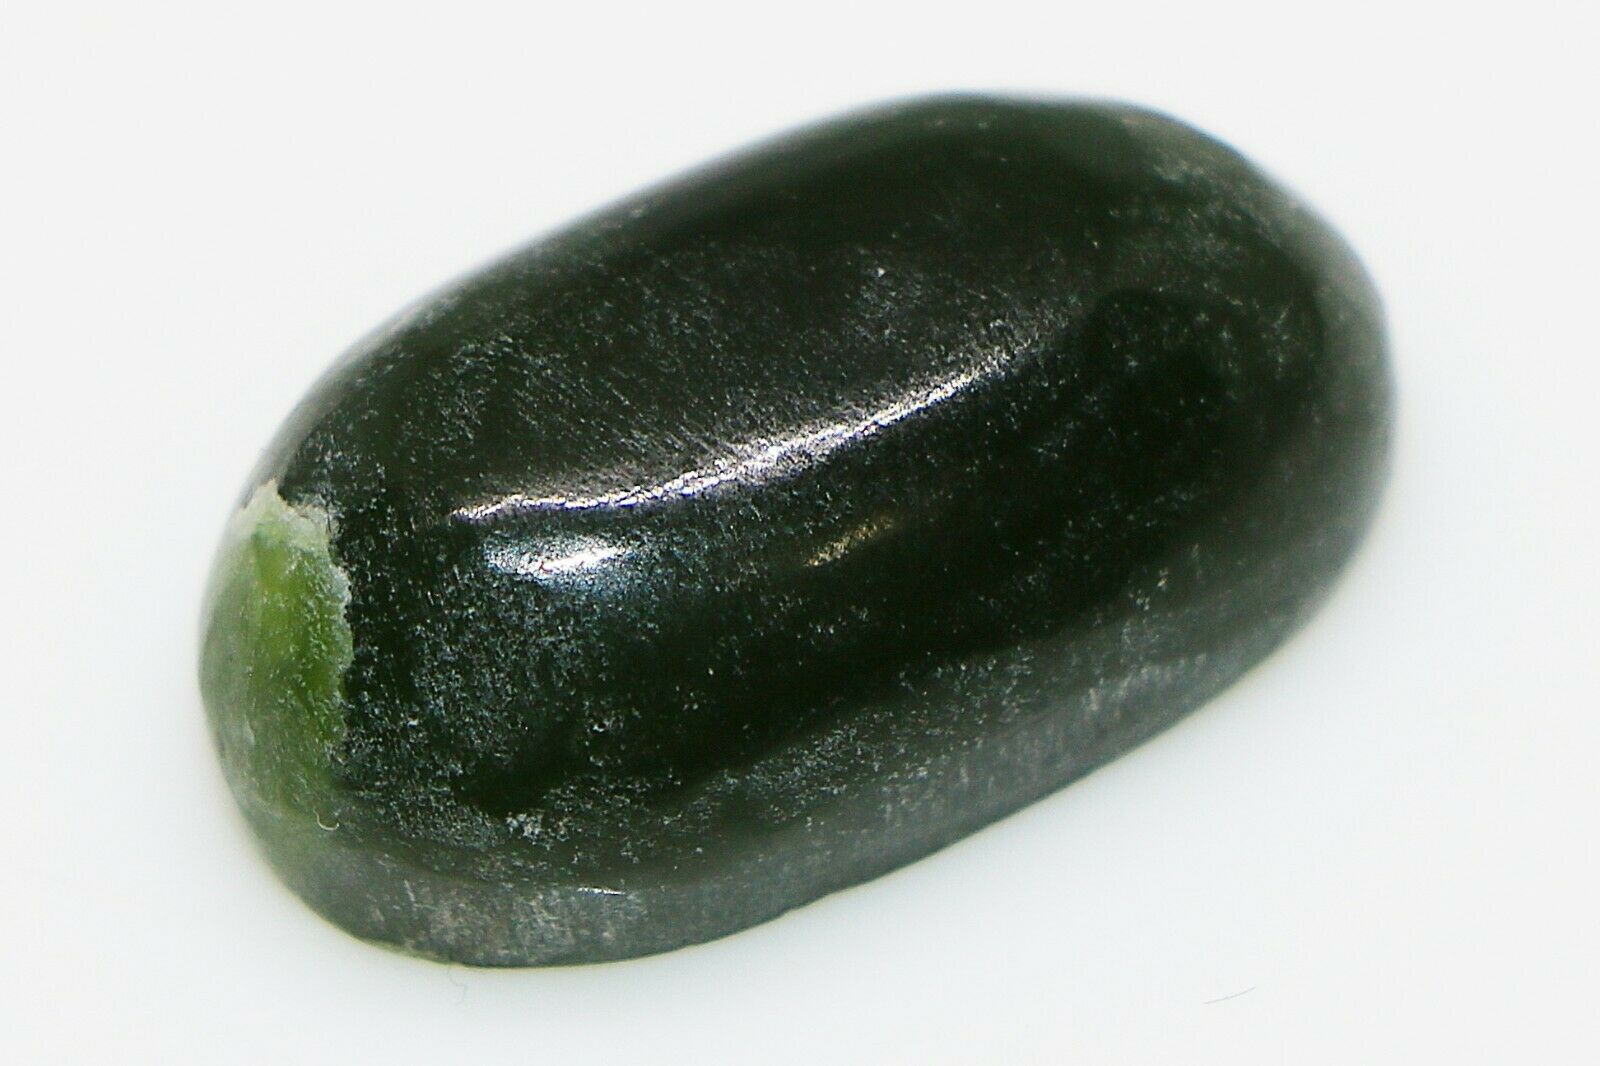 Natural Rare Afghanistan Nephrite Jade Loose Gem Stone With Certificate -25.47ct